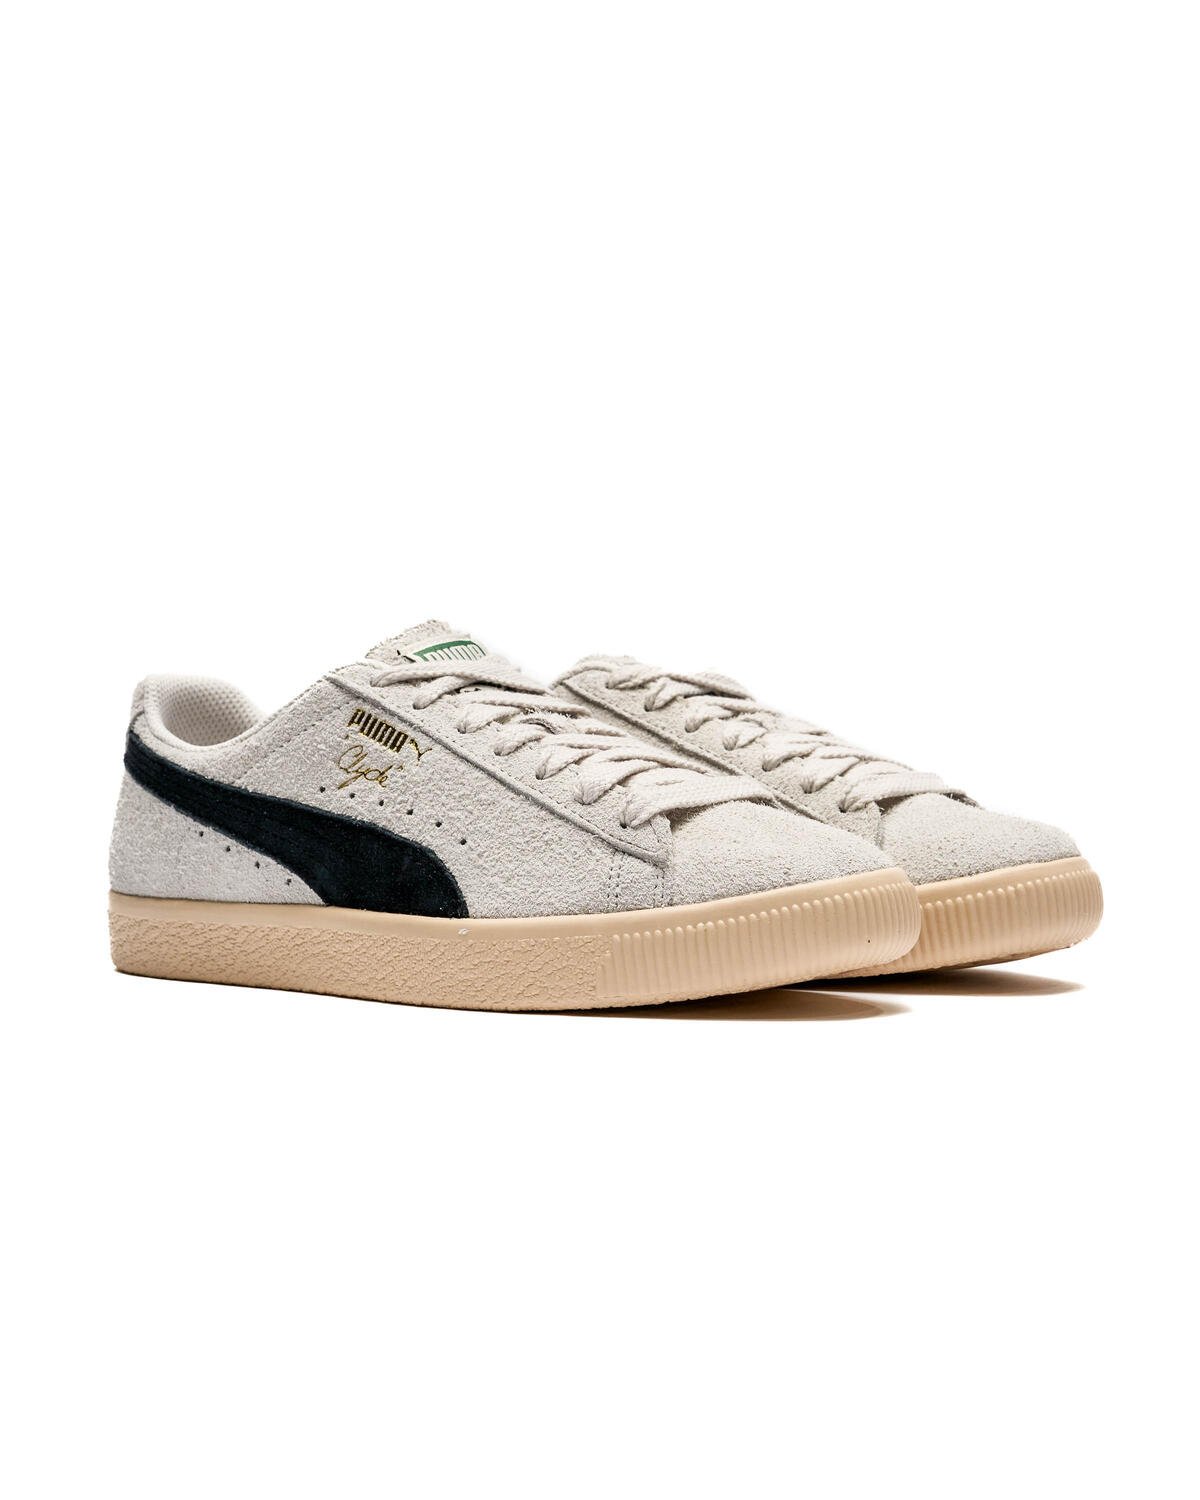 Puma Clyde Hairy Suede | 393115-01 | AFEW STORE